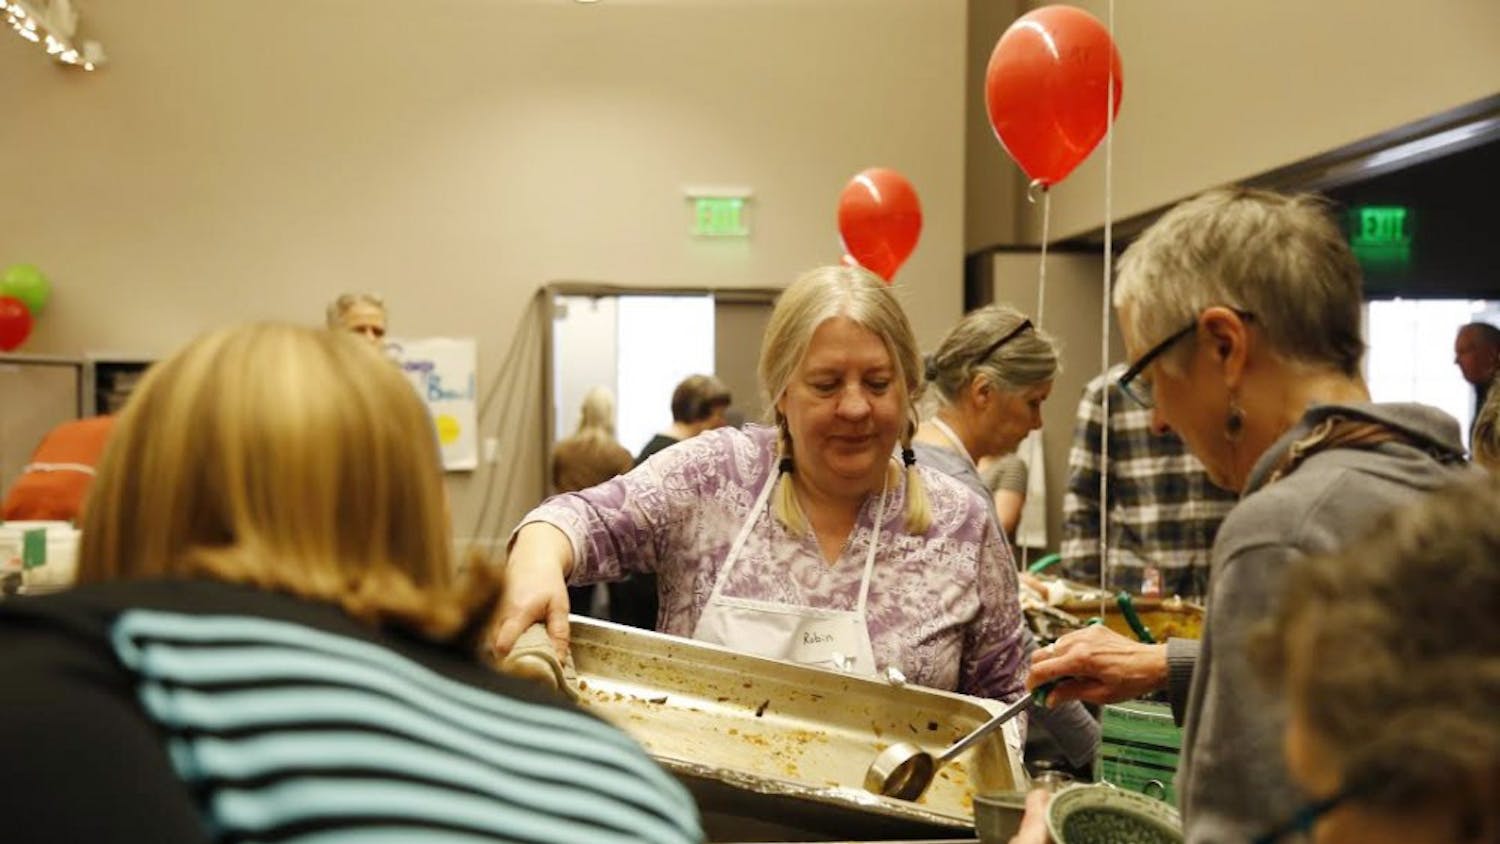 Robin Menzyka, a volunteer at the 24th Annual Soup Bowl Benefit, serves soup for attendees Sunday, Feb. 18. The soup bowl is a fundraising opportunity for Hoosier Hills Food Bank that served soup from 42 local business this year.&nbsp;